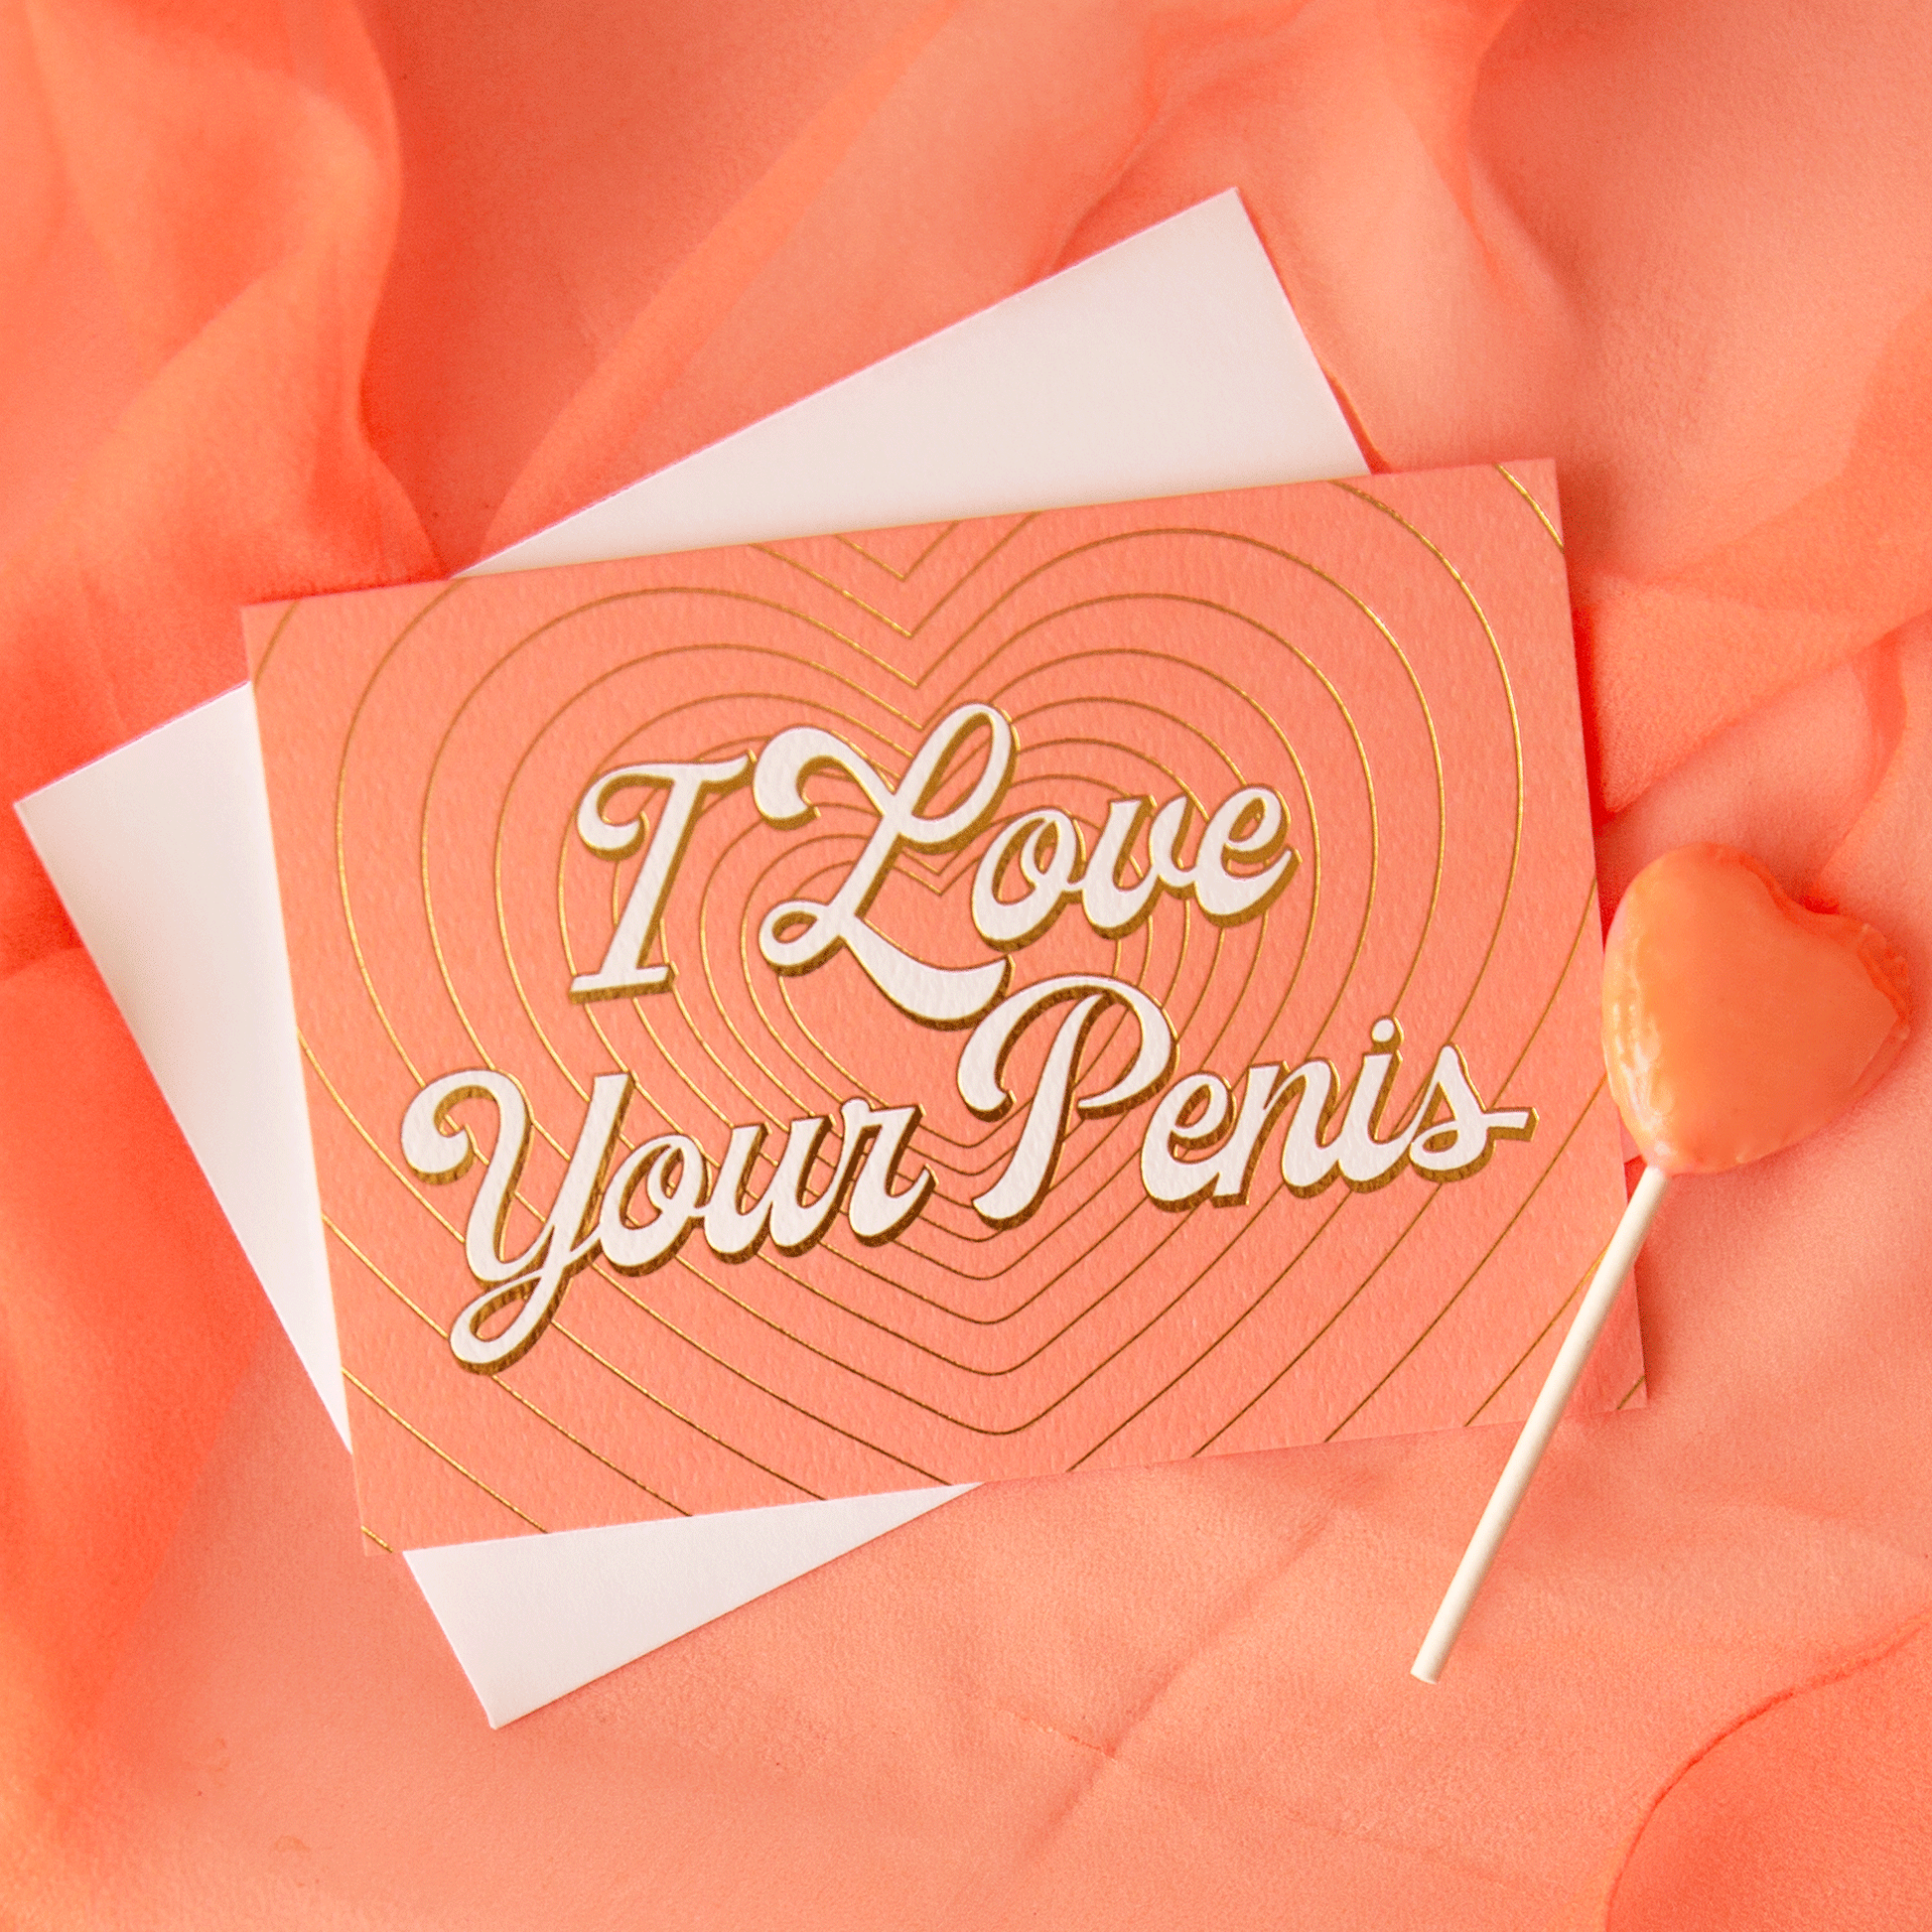 On a peachy background is a peachy colored card with layered gold foiled hearts and ivory text that reads, "I Love Your Penis" along with a white envelope.On a peachy background is a peachy colored card with layered gold foiled hearts and ivory text that reads, "I Love Your Penis" along with a white envelope.